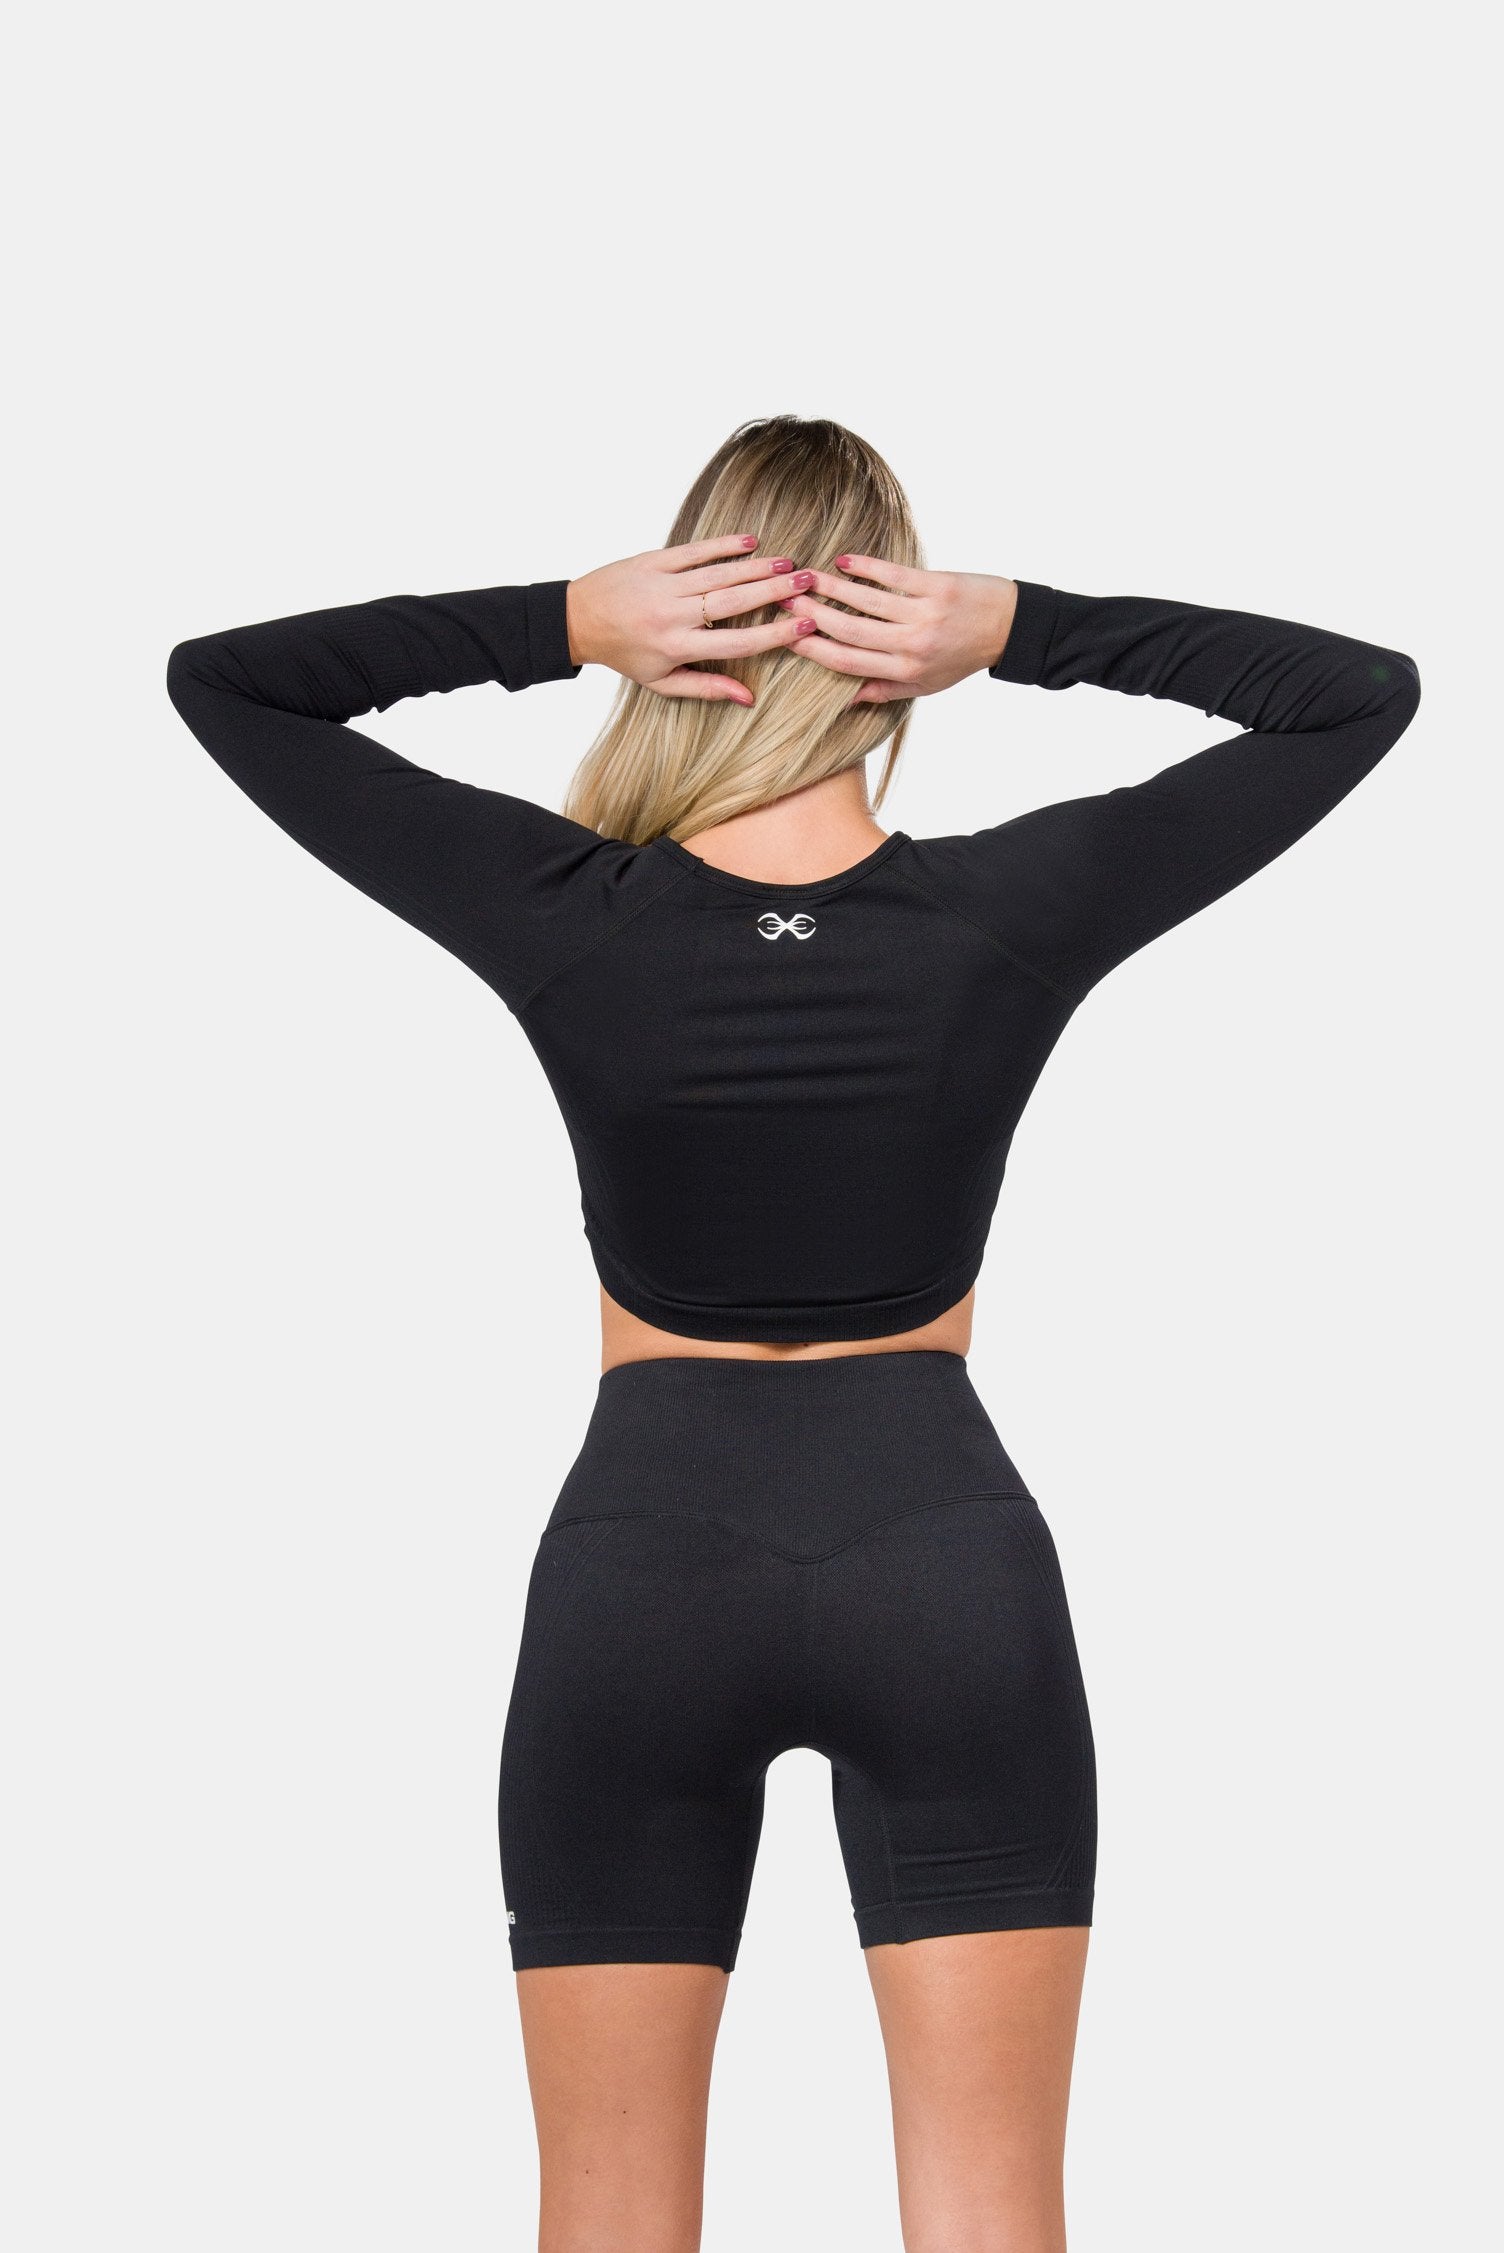 Sting Allure Seamless Long Sleeve – Sting Sports Canada ᵀᴹ